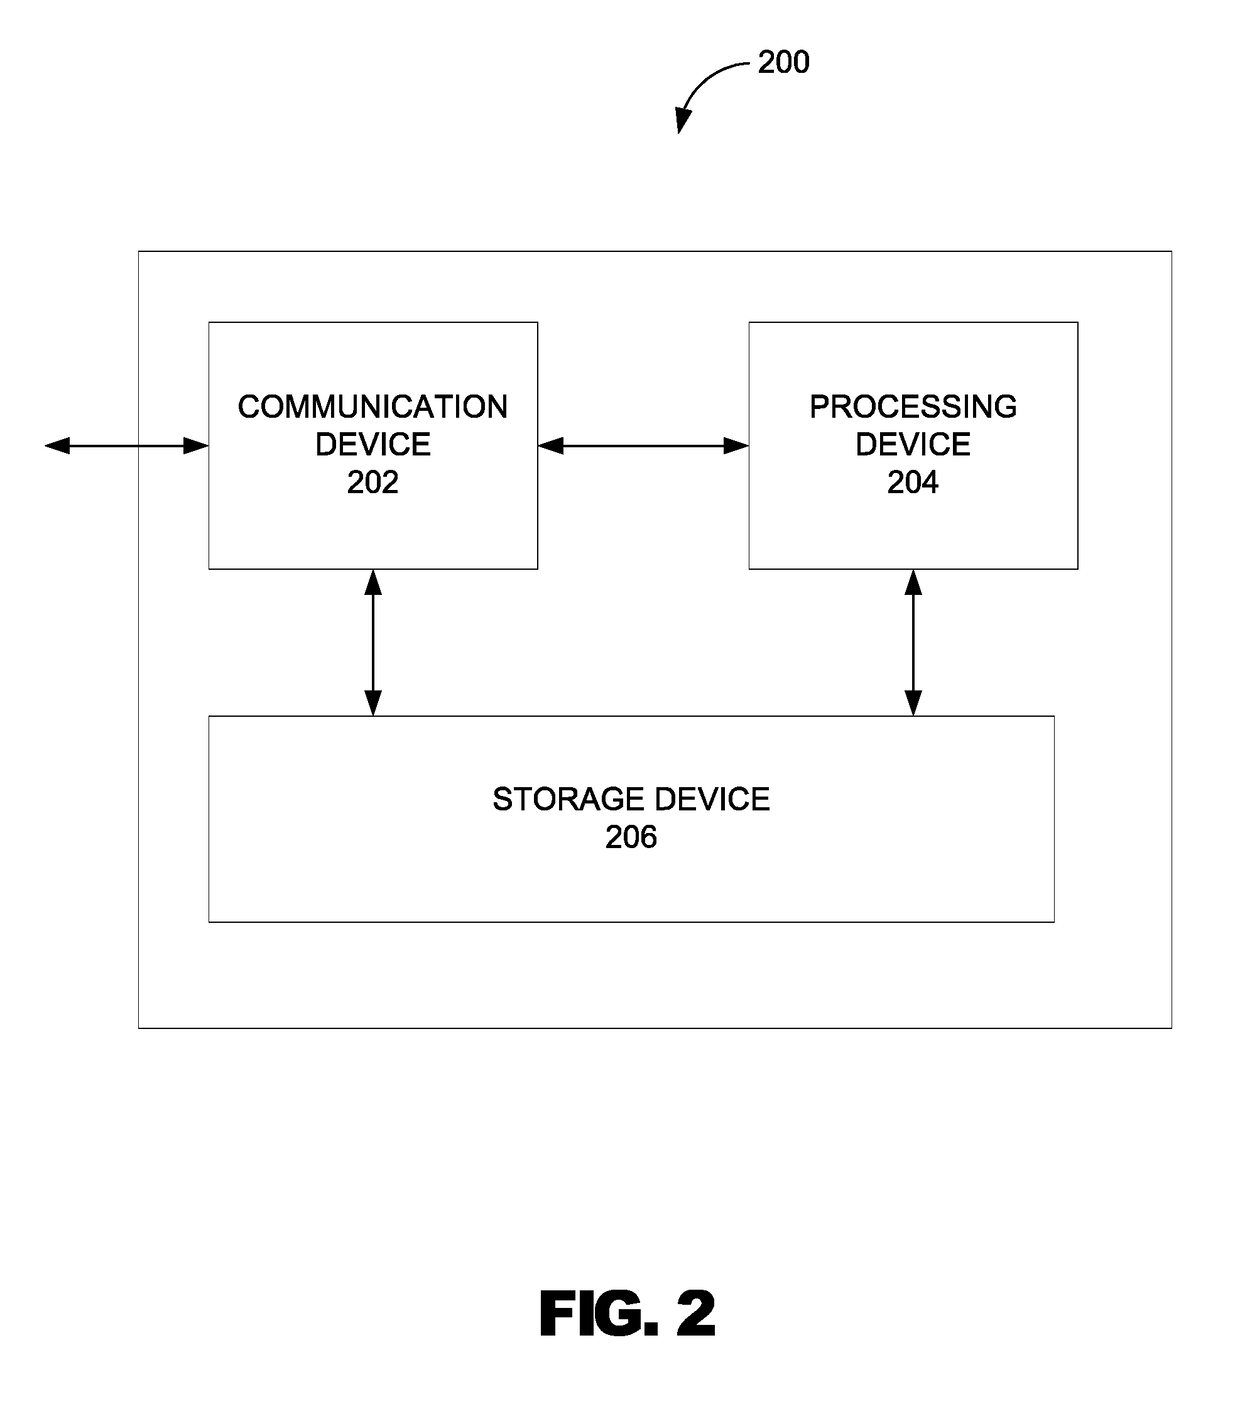 Method and System for Facilitating Management of Service Agreements for Consumer Clarity Over Multiple Channels